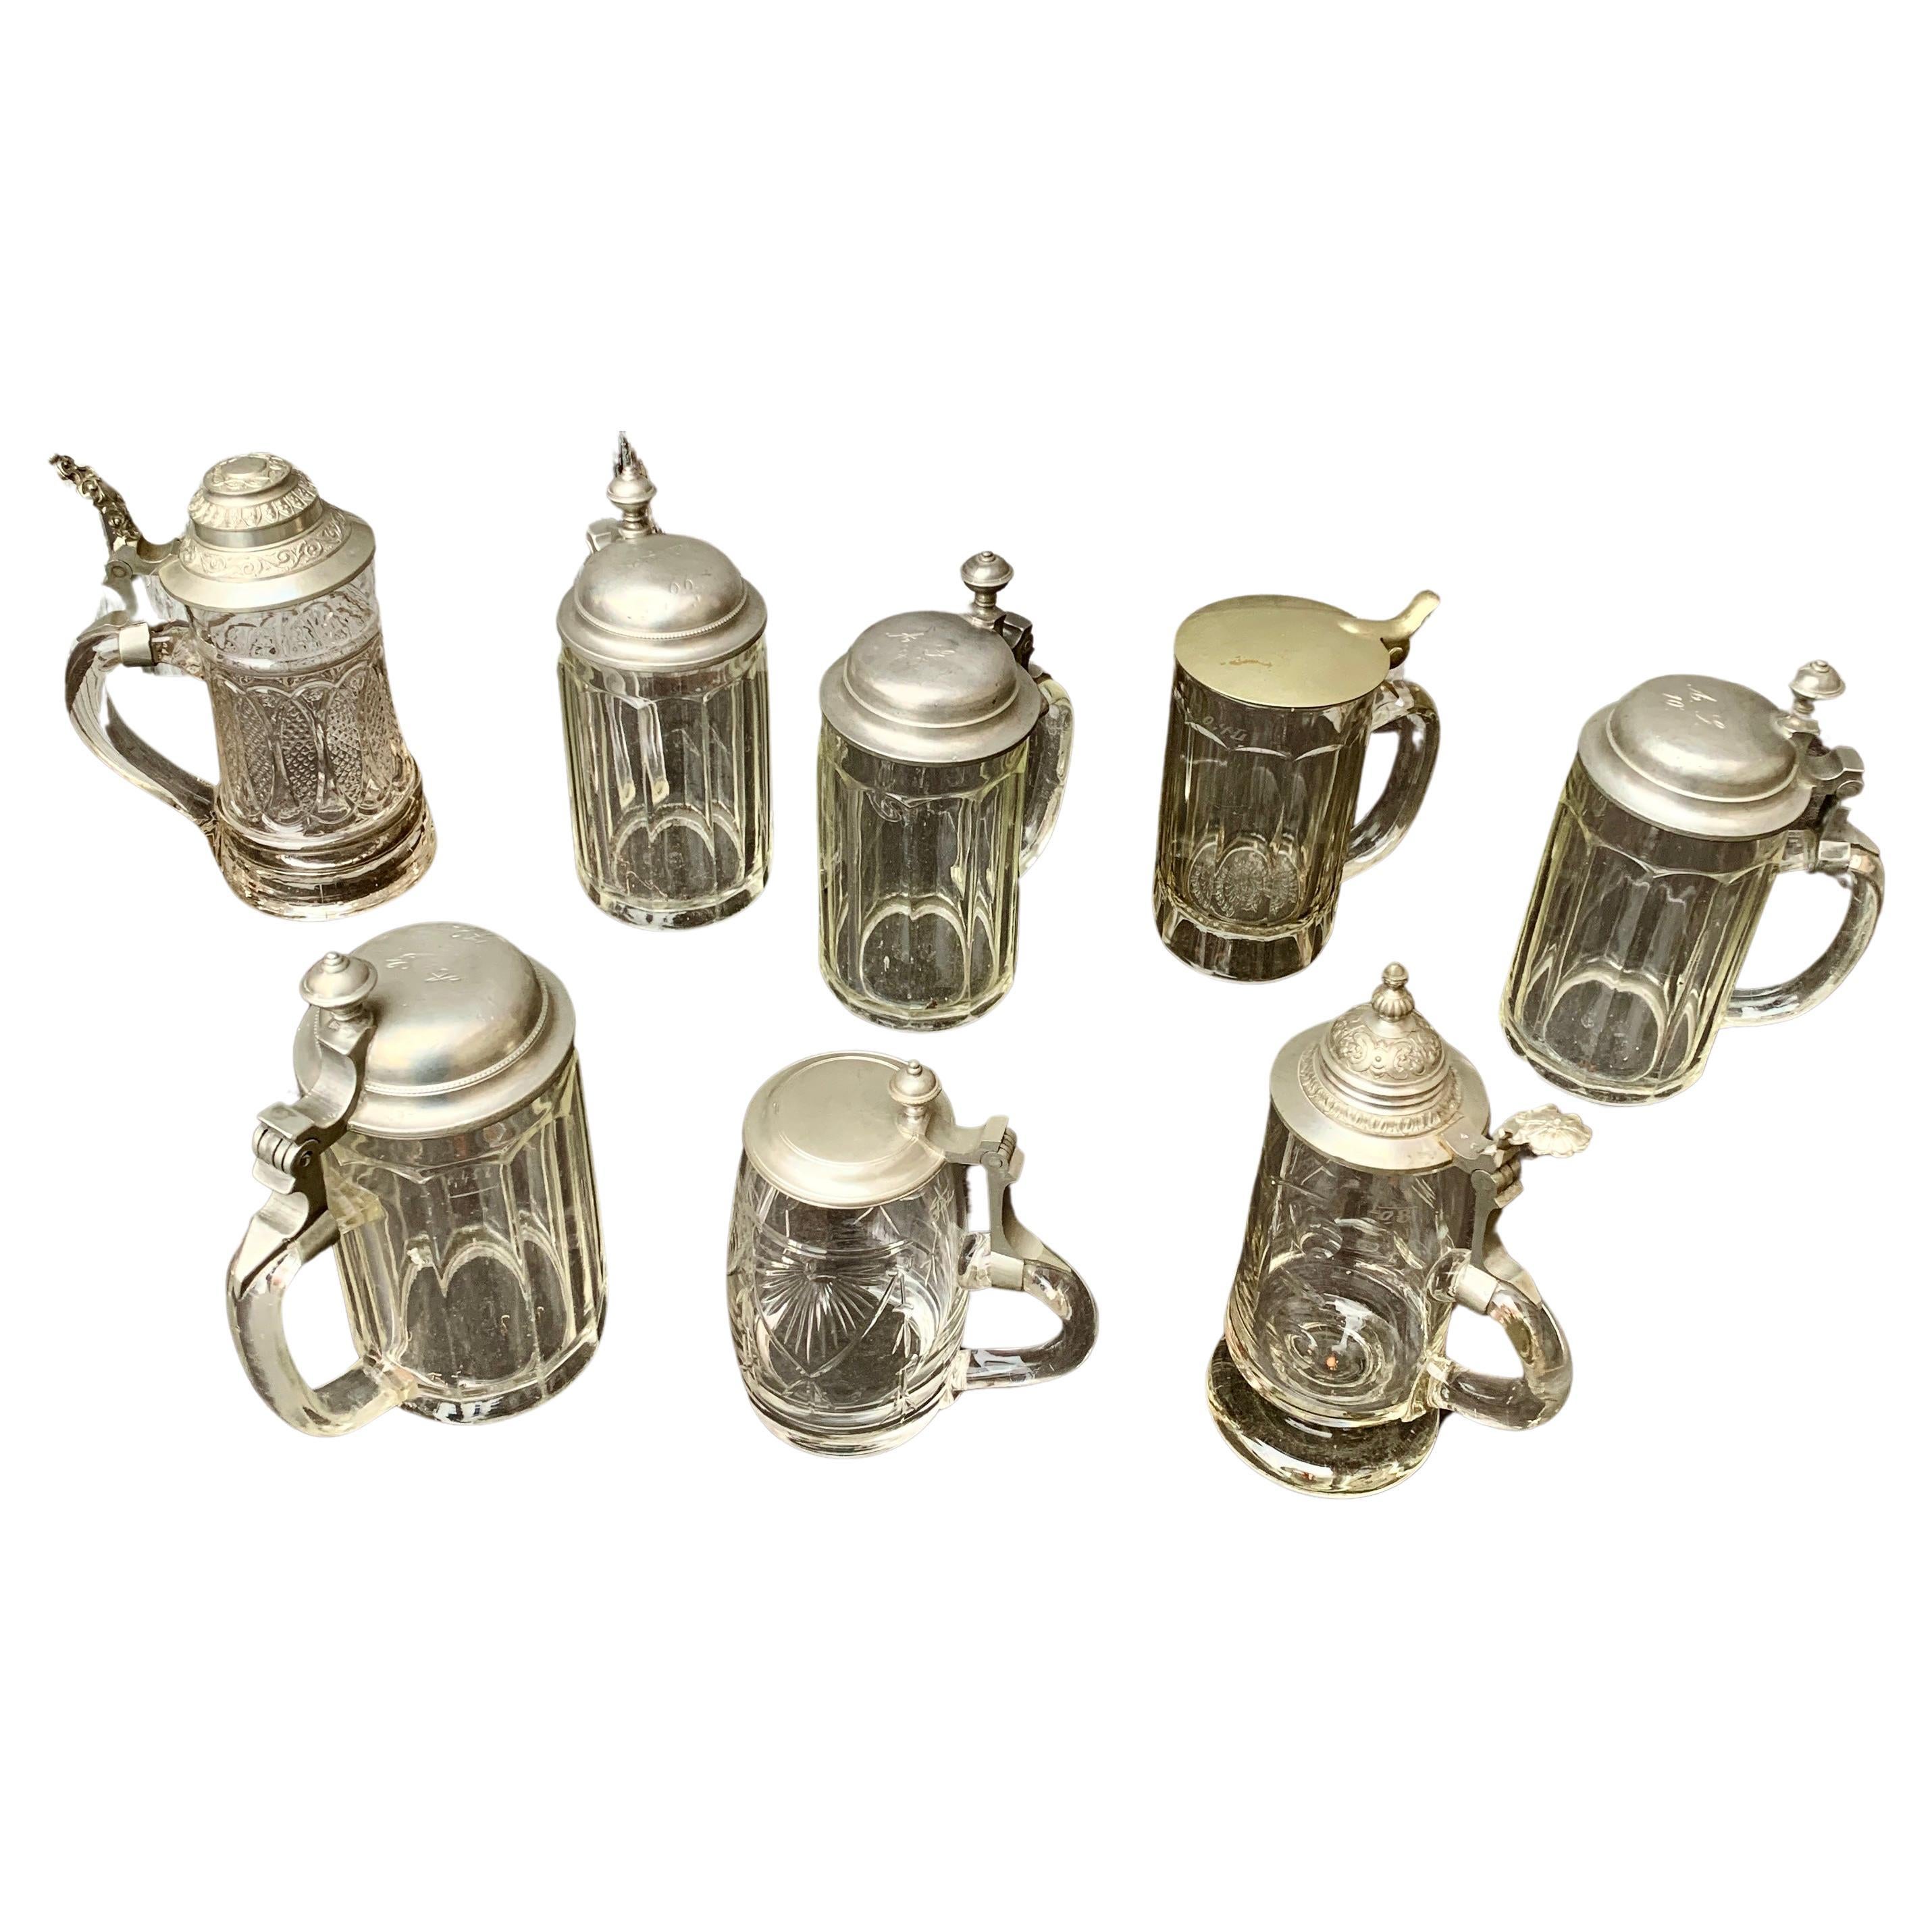 A collection of 8 pieces of tankards in glass with metal lids from the end of the 19th Century and beginning of the 20th Century. Probably these have been used for beer drinking. Four of these of the same model have a number printed in the metal lid